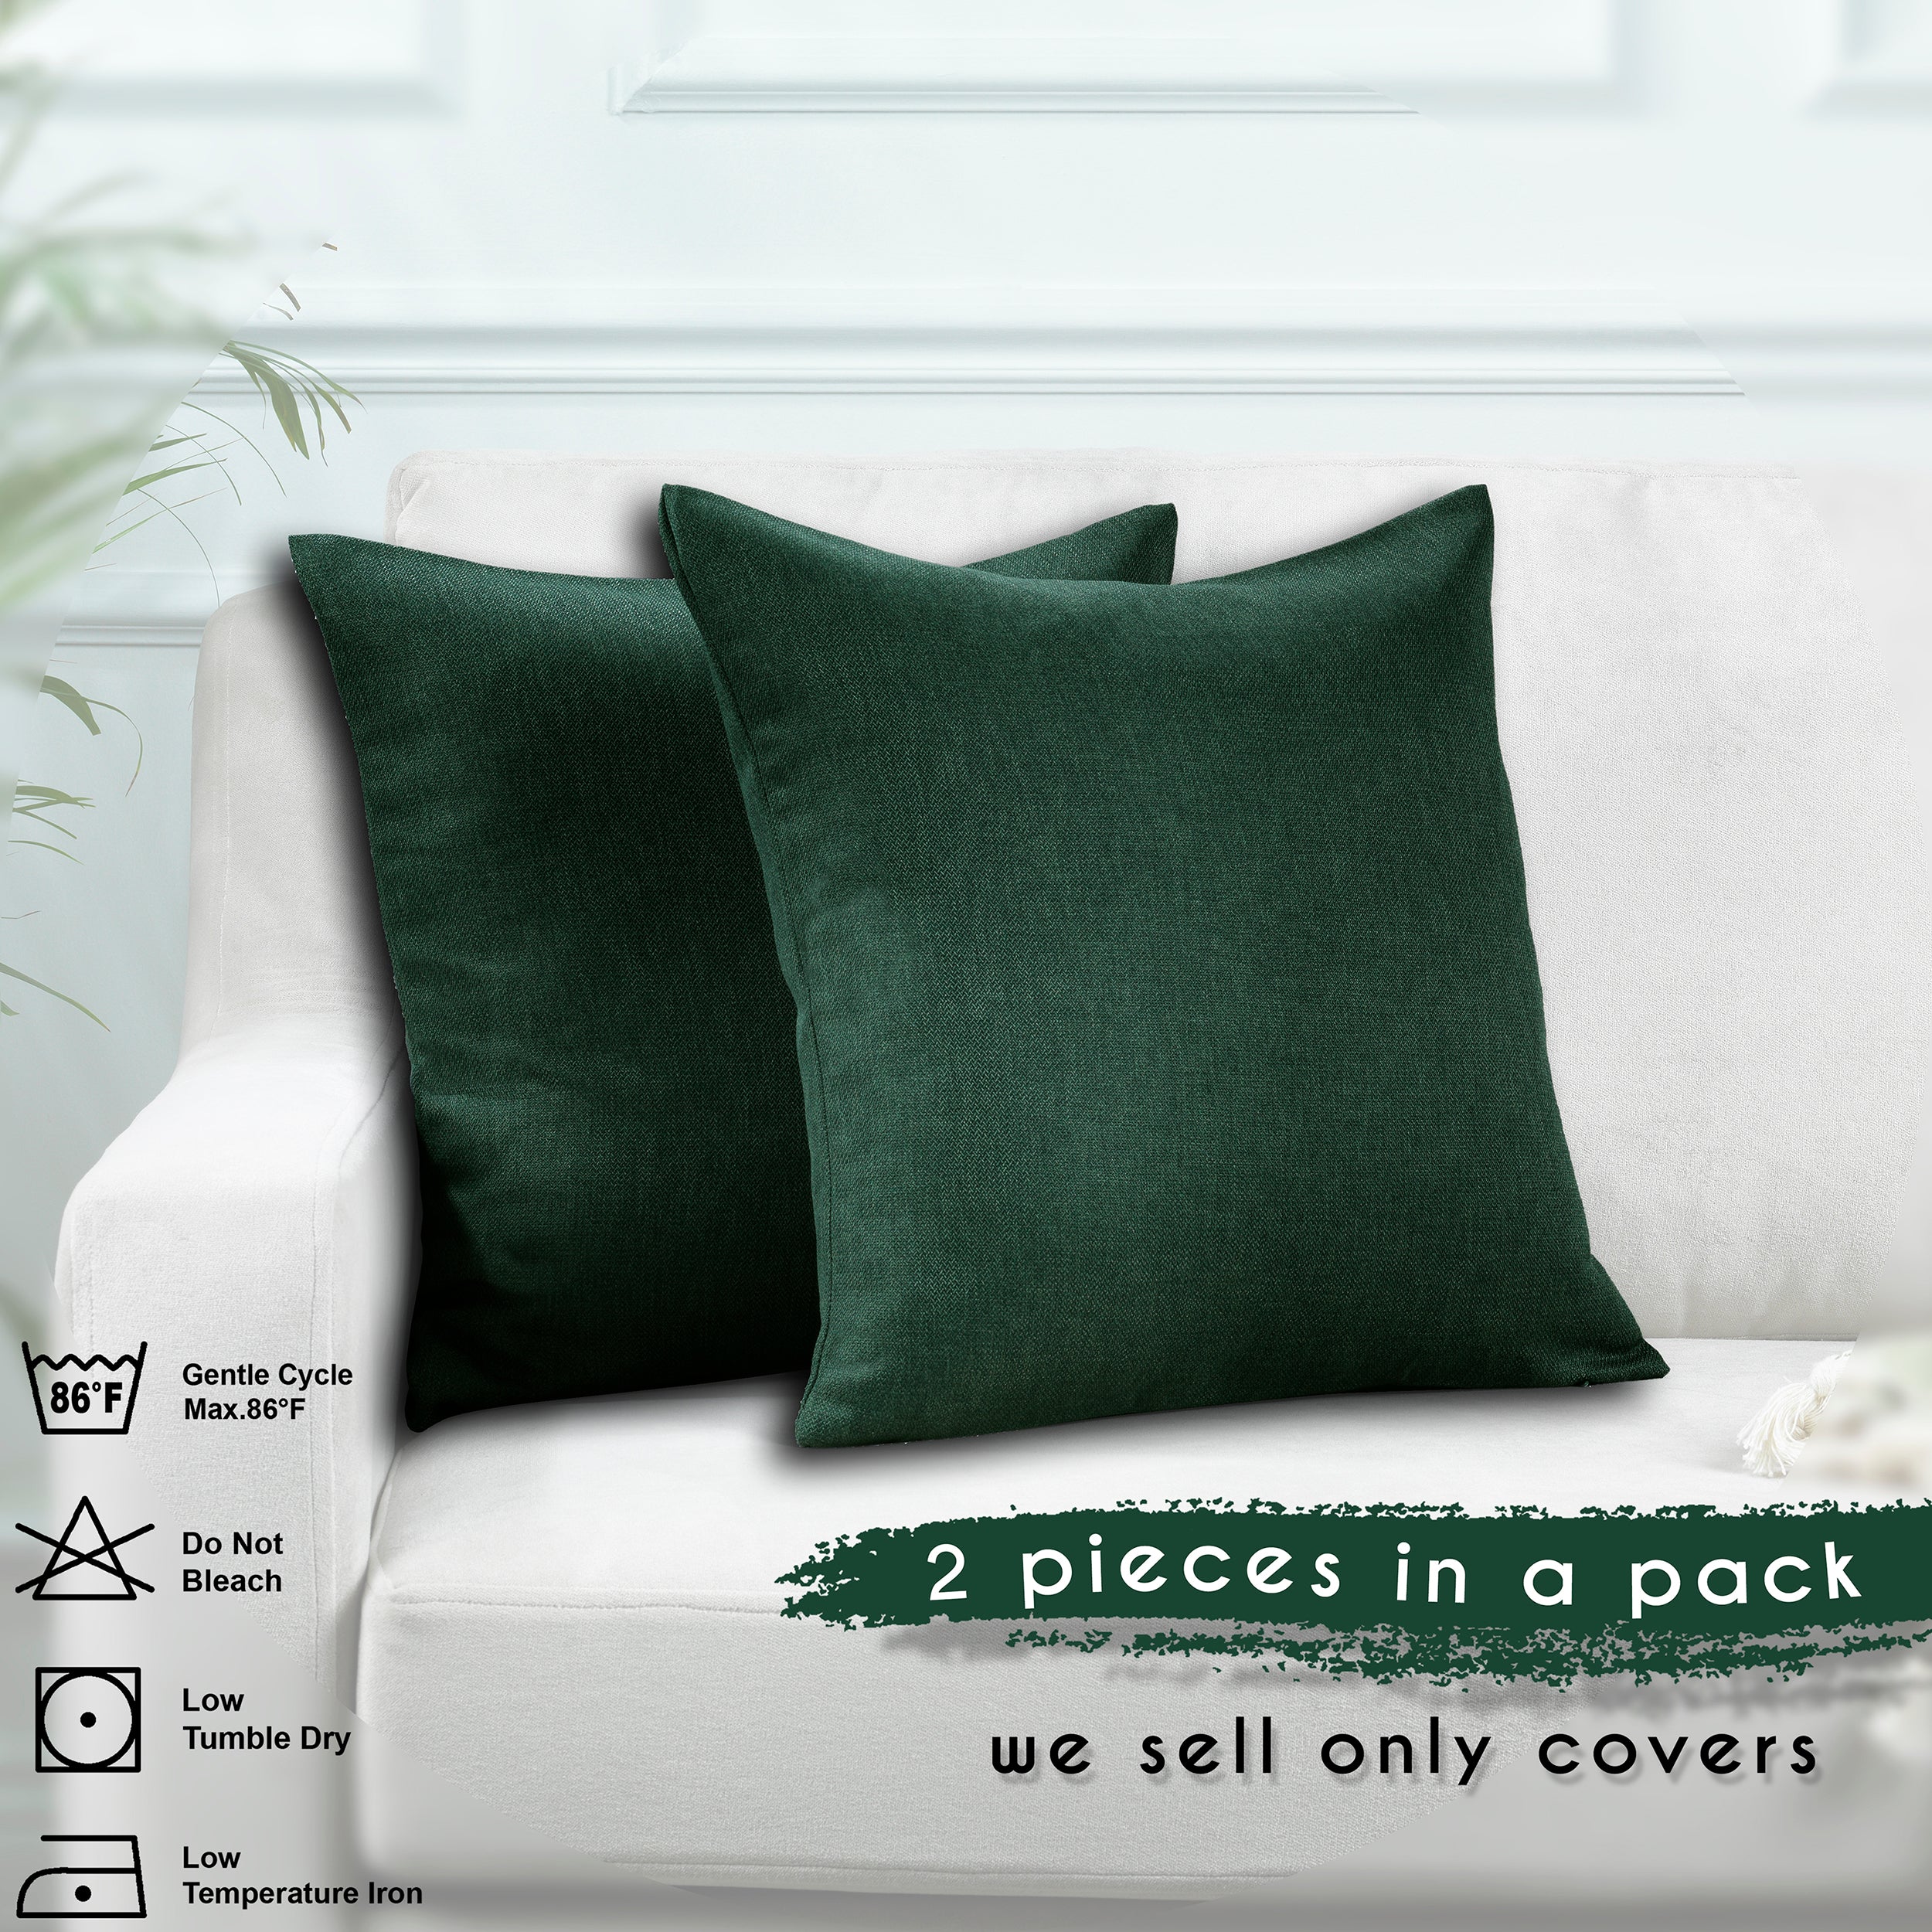 Couch Pillow Covers 18x18 Set of 4, Emerald Green and Gold Home